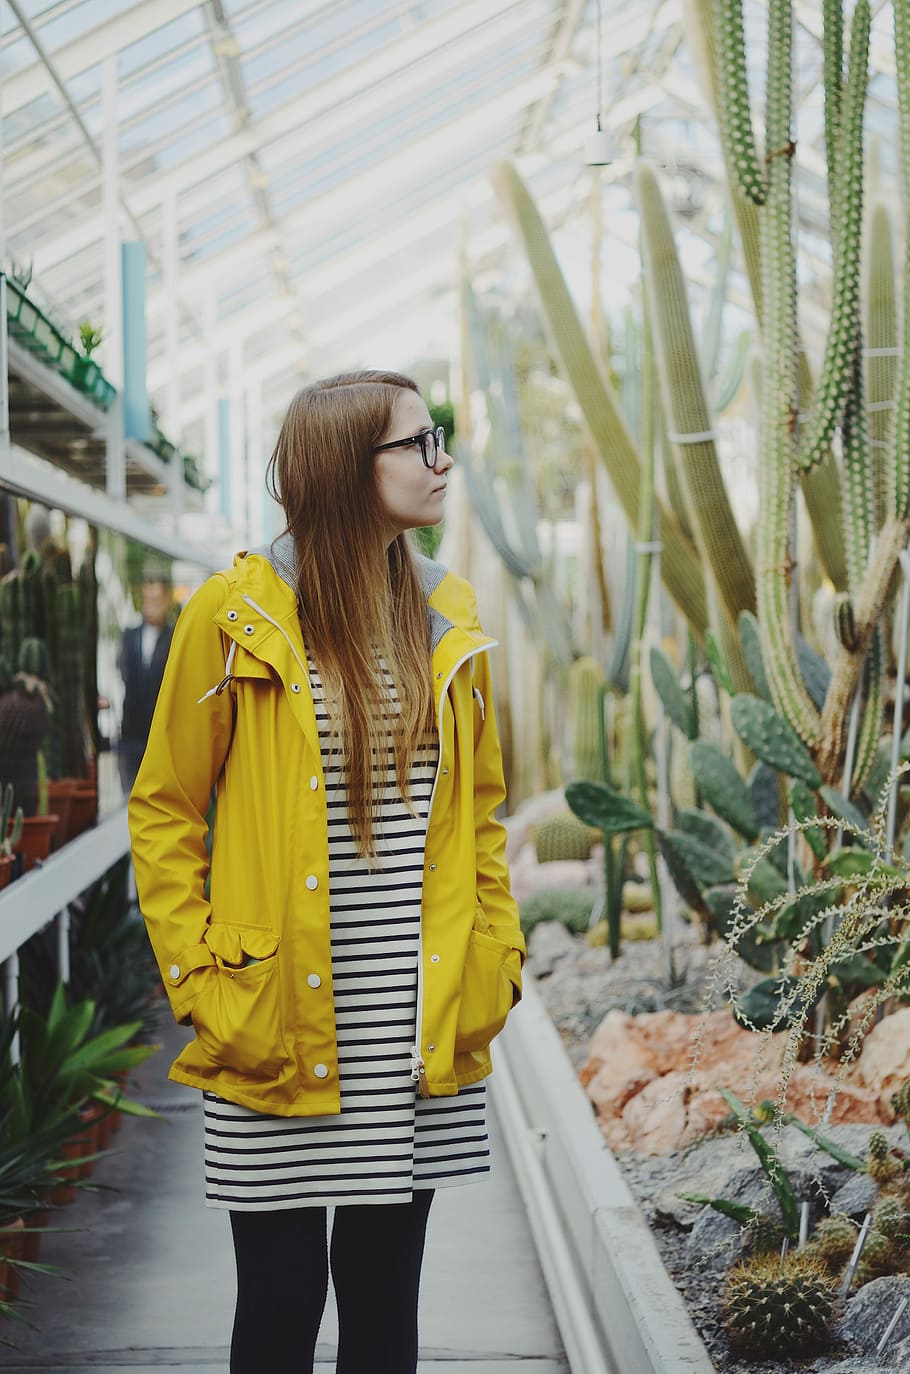 woman wearing black and white striped dress and yellow jacket staring at plant